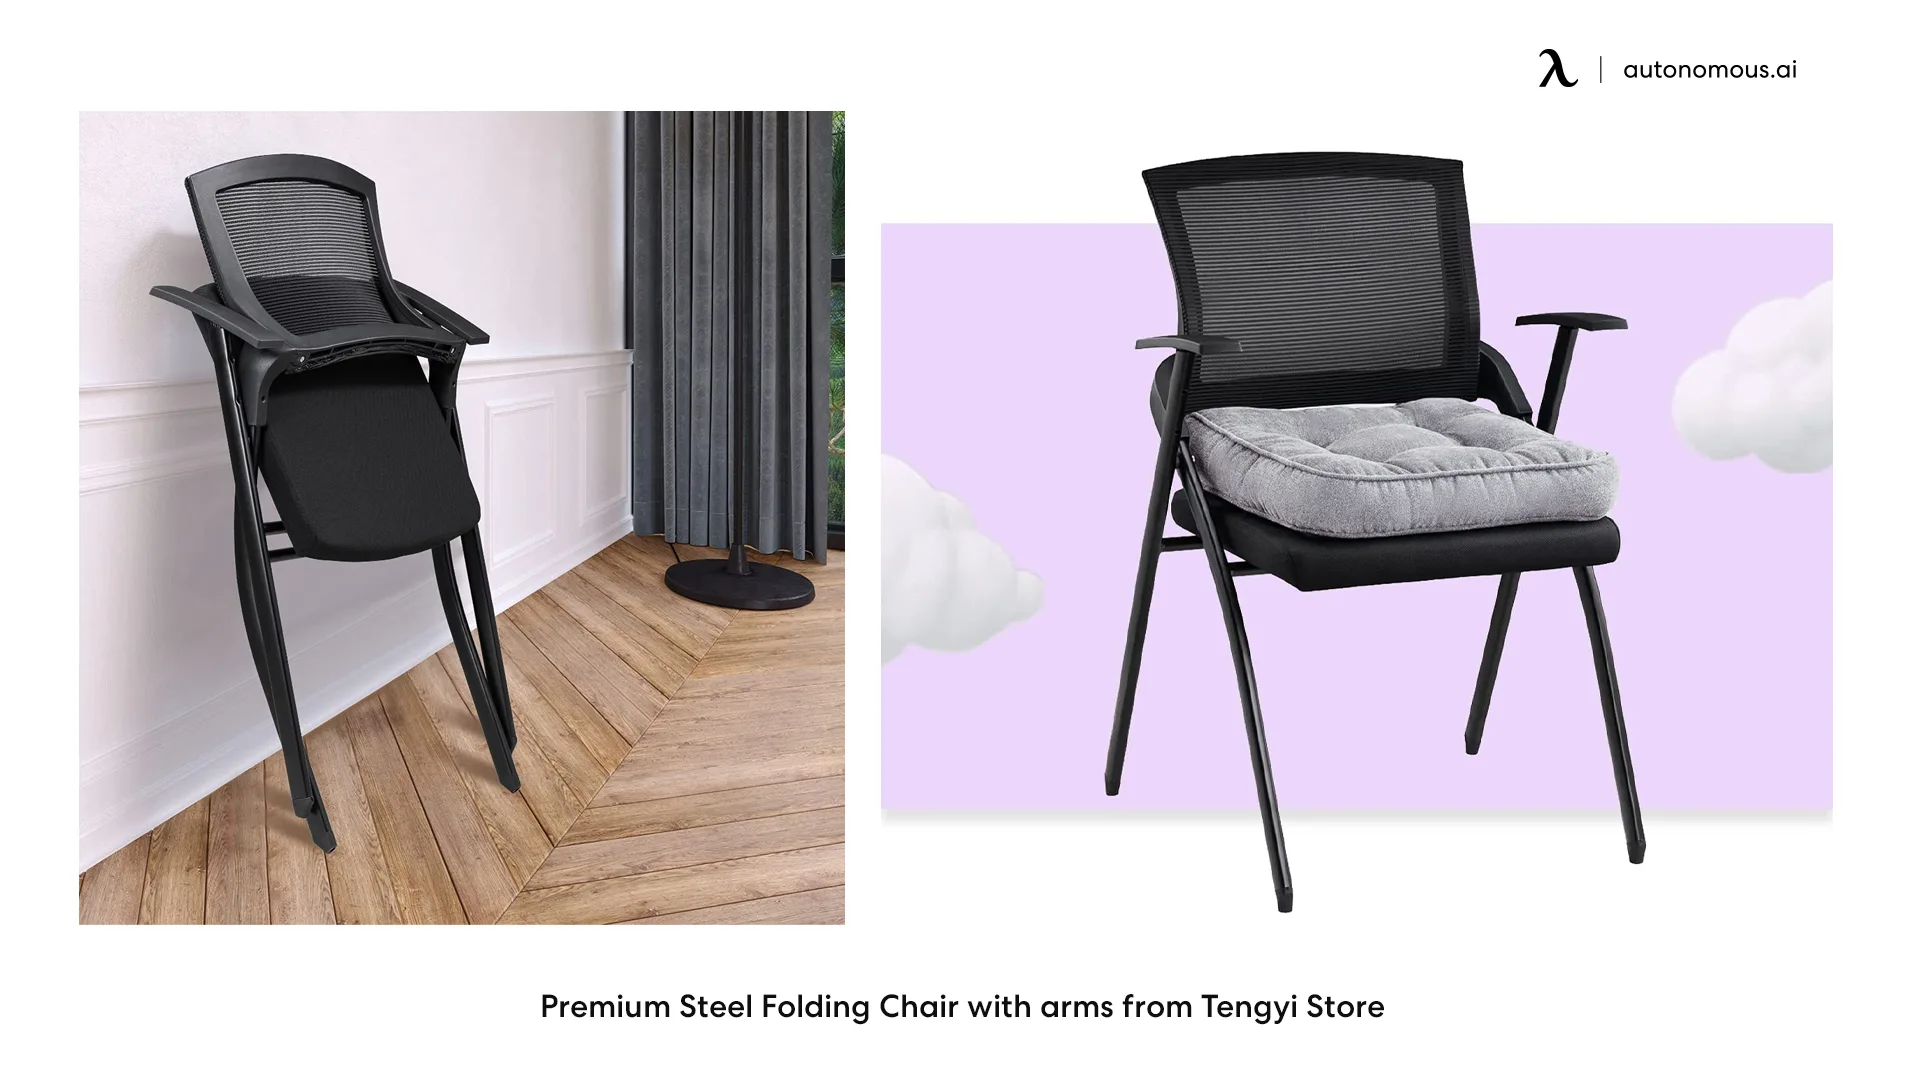 Premium Steel Folding Chair with arms from Tengyi Store